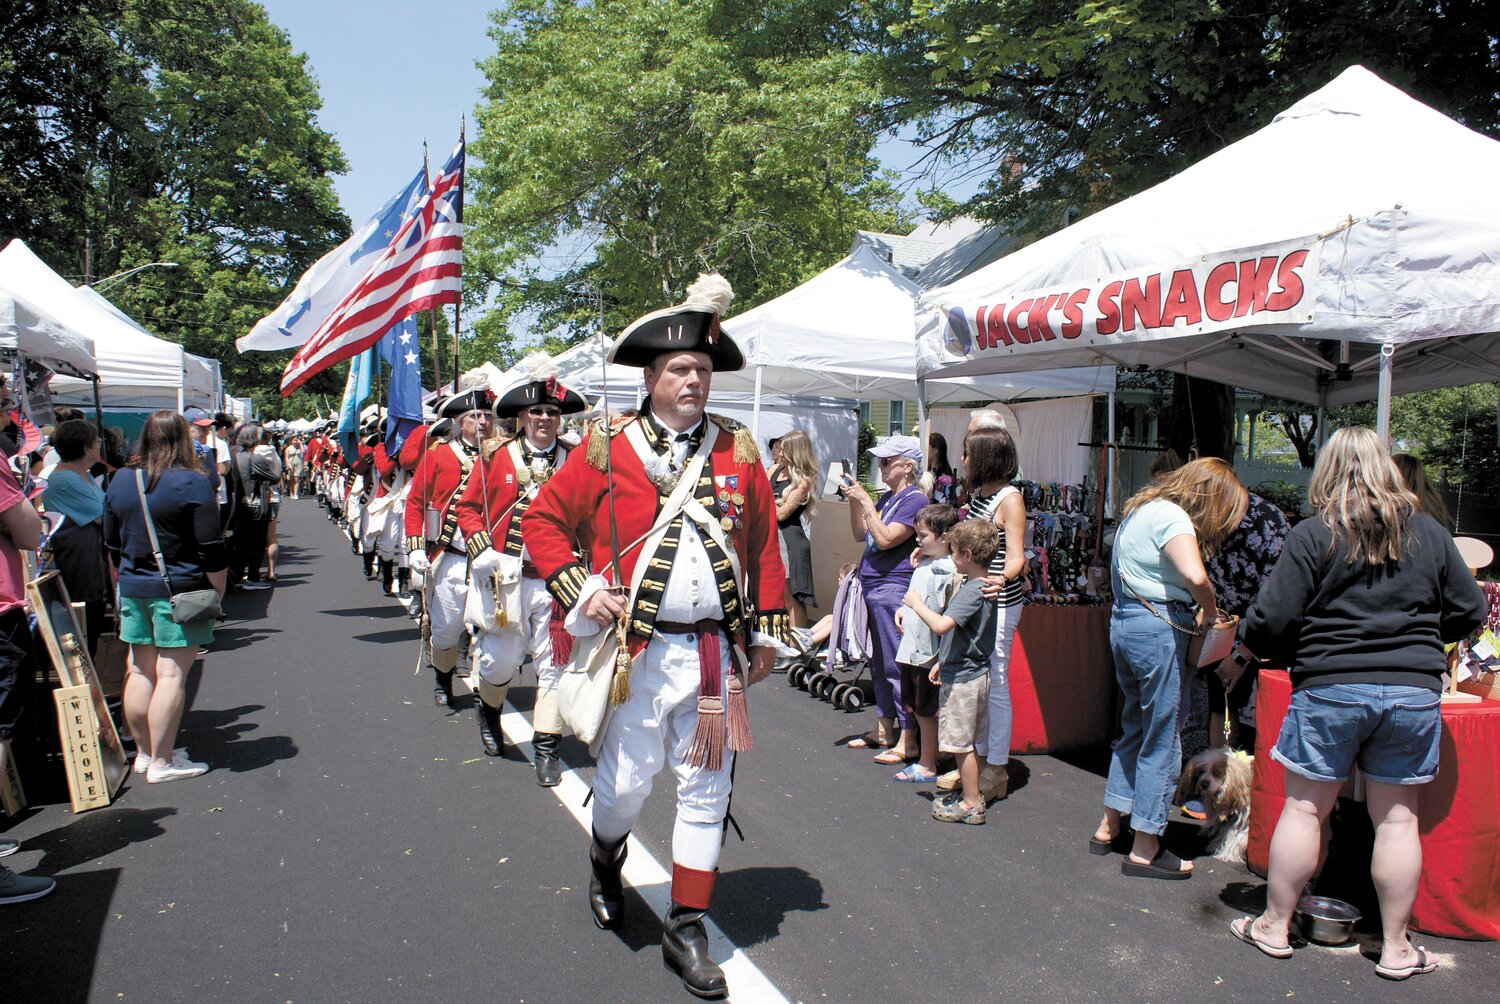 MARCHING STRONG: The Pawtuxet Rangers, one of the oldest chartered military militias in the country, march to celebrate the Gaspee Days festival. With the celebration going on all the way through June 11, those attending can still look forward to a host of wonderful attractions. June 3 will bring the Warwick Symphony Orchestra to Pawtuxet Park at 5:30 p.m. to entertain crowds with music and then fireworks will light up Salter’s Grove, Warwick, starting at 9:30 p.m. The final weekend of Gaspee takes place over Saturday June 10 and Sunday June 11. Events will include Ecumenical Services from Trinity Episcopal Church and a Gaspee Days 5K race on Saturday before the annual Gaspee Days Parade, which begins at 10 a.m. and travels the lenght of Narragansett Parway in Warwick. Sunday will bring the Blessing of the Fleet at Rhode Island Yacht Club  at 11 a.m., several events in Pawtuxet park, such as Sunday in the Park with live music and food at noon, a raffle drawing at 3 p.m. and the traditional Burning of the Gaspee at 4 p.m.   (Photo by Steve Popiel)